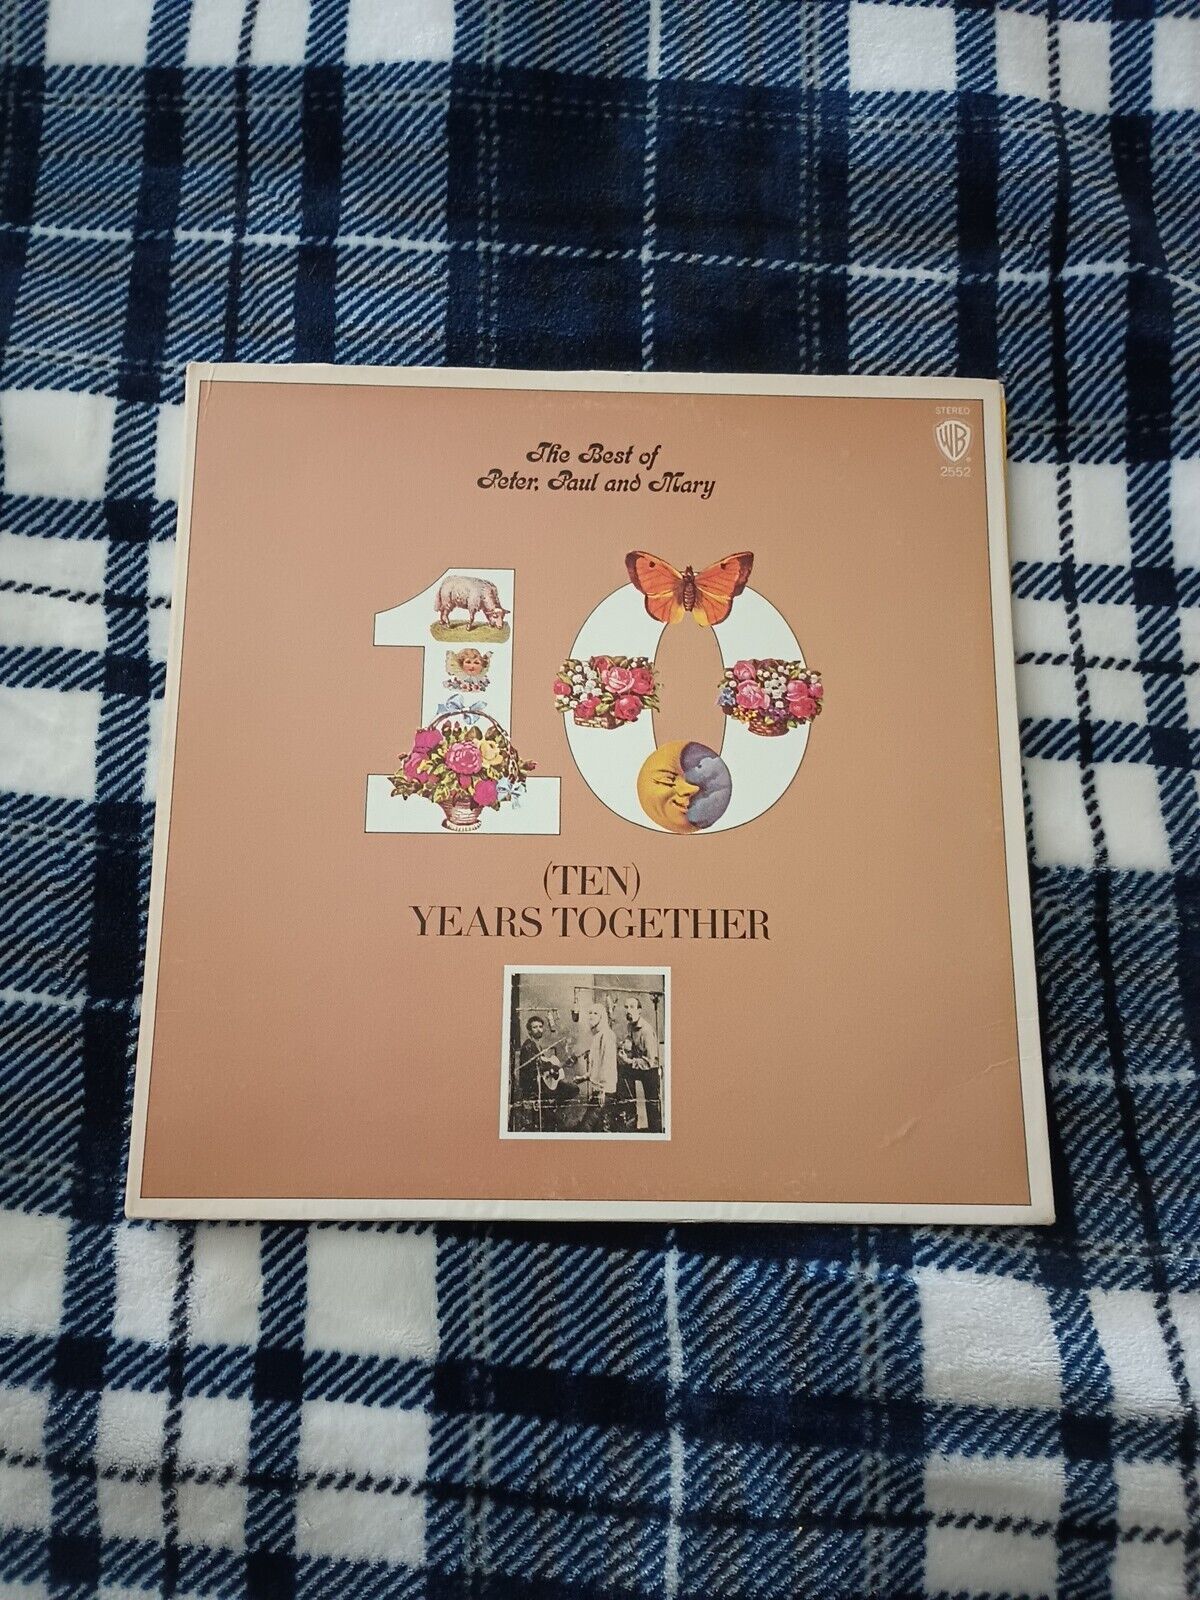 The Best of Peter Paul and Mary 10 (Ten Years Together) Warner Bros 1970